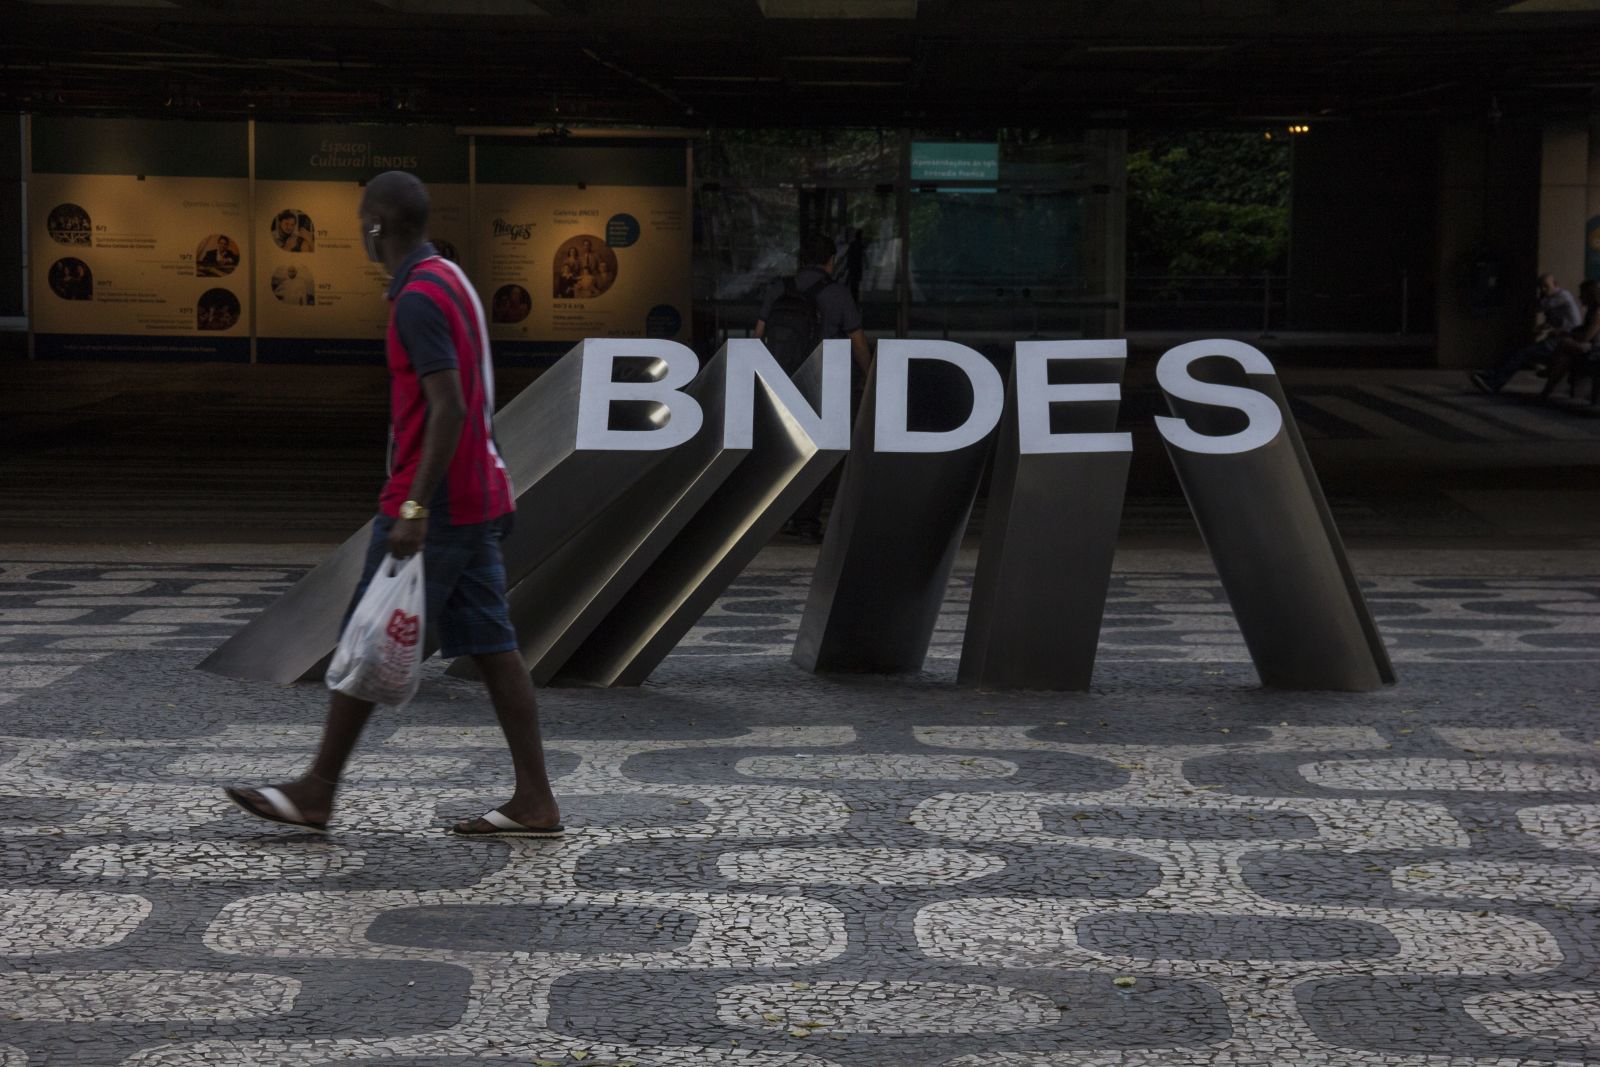 The Brazilian Development Bank BNDES has become the first institution to use TruBudget in its procedures and IT-systems.